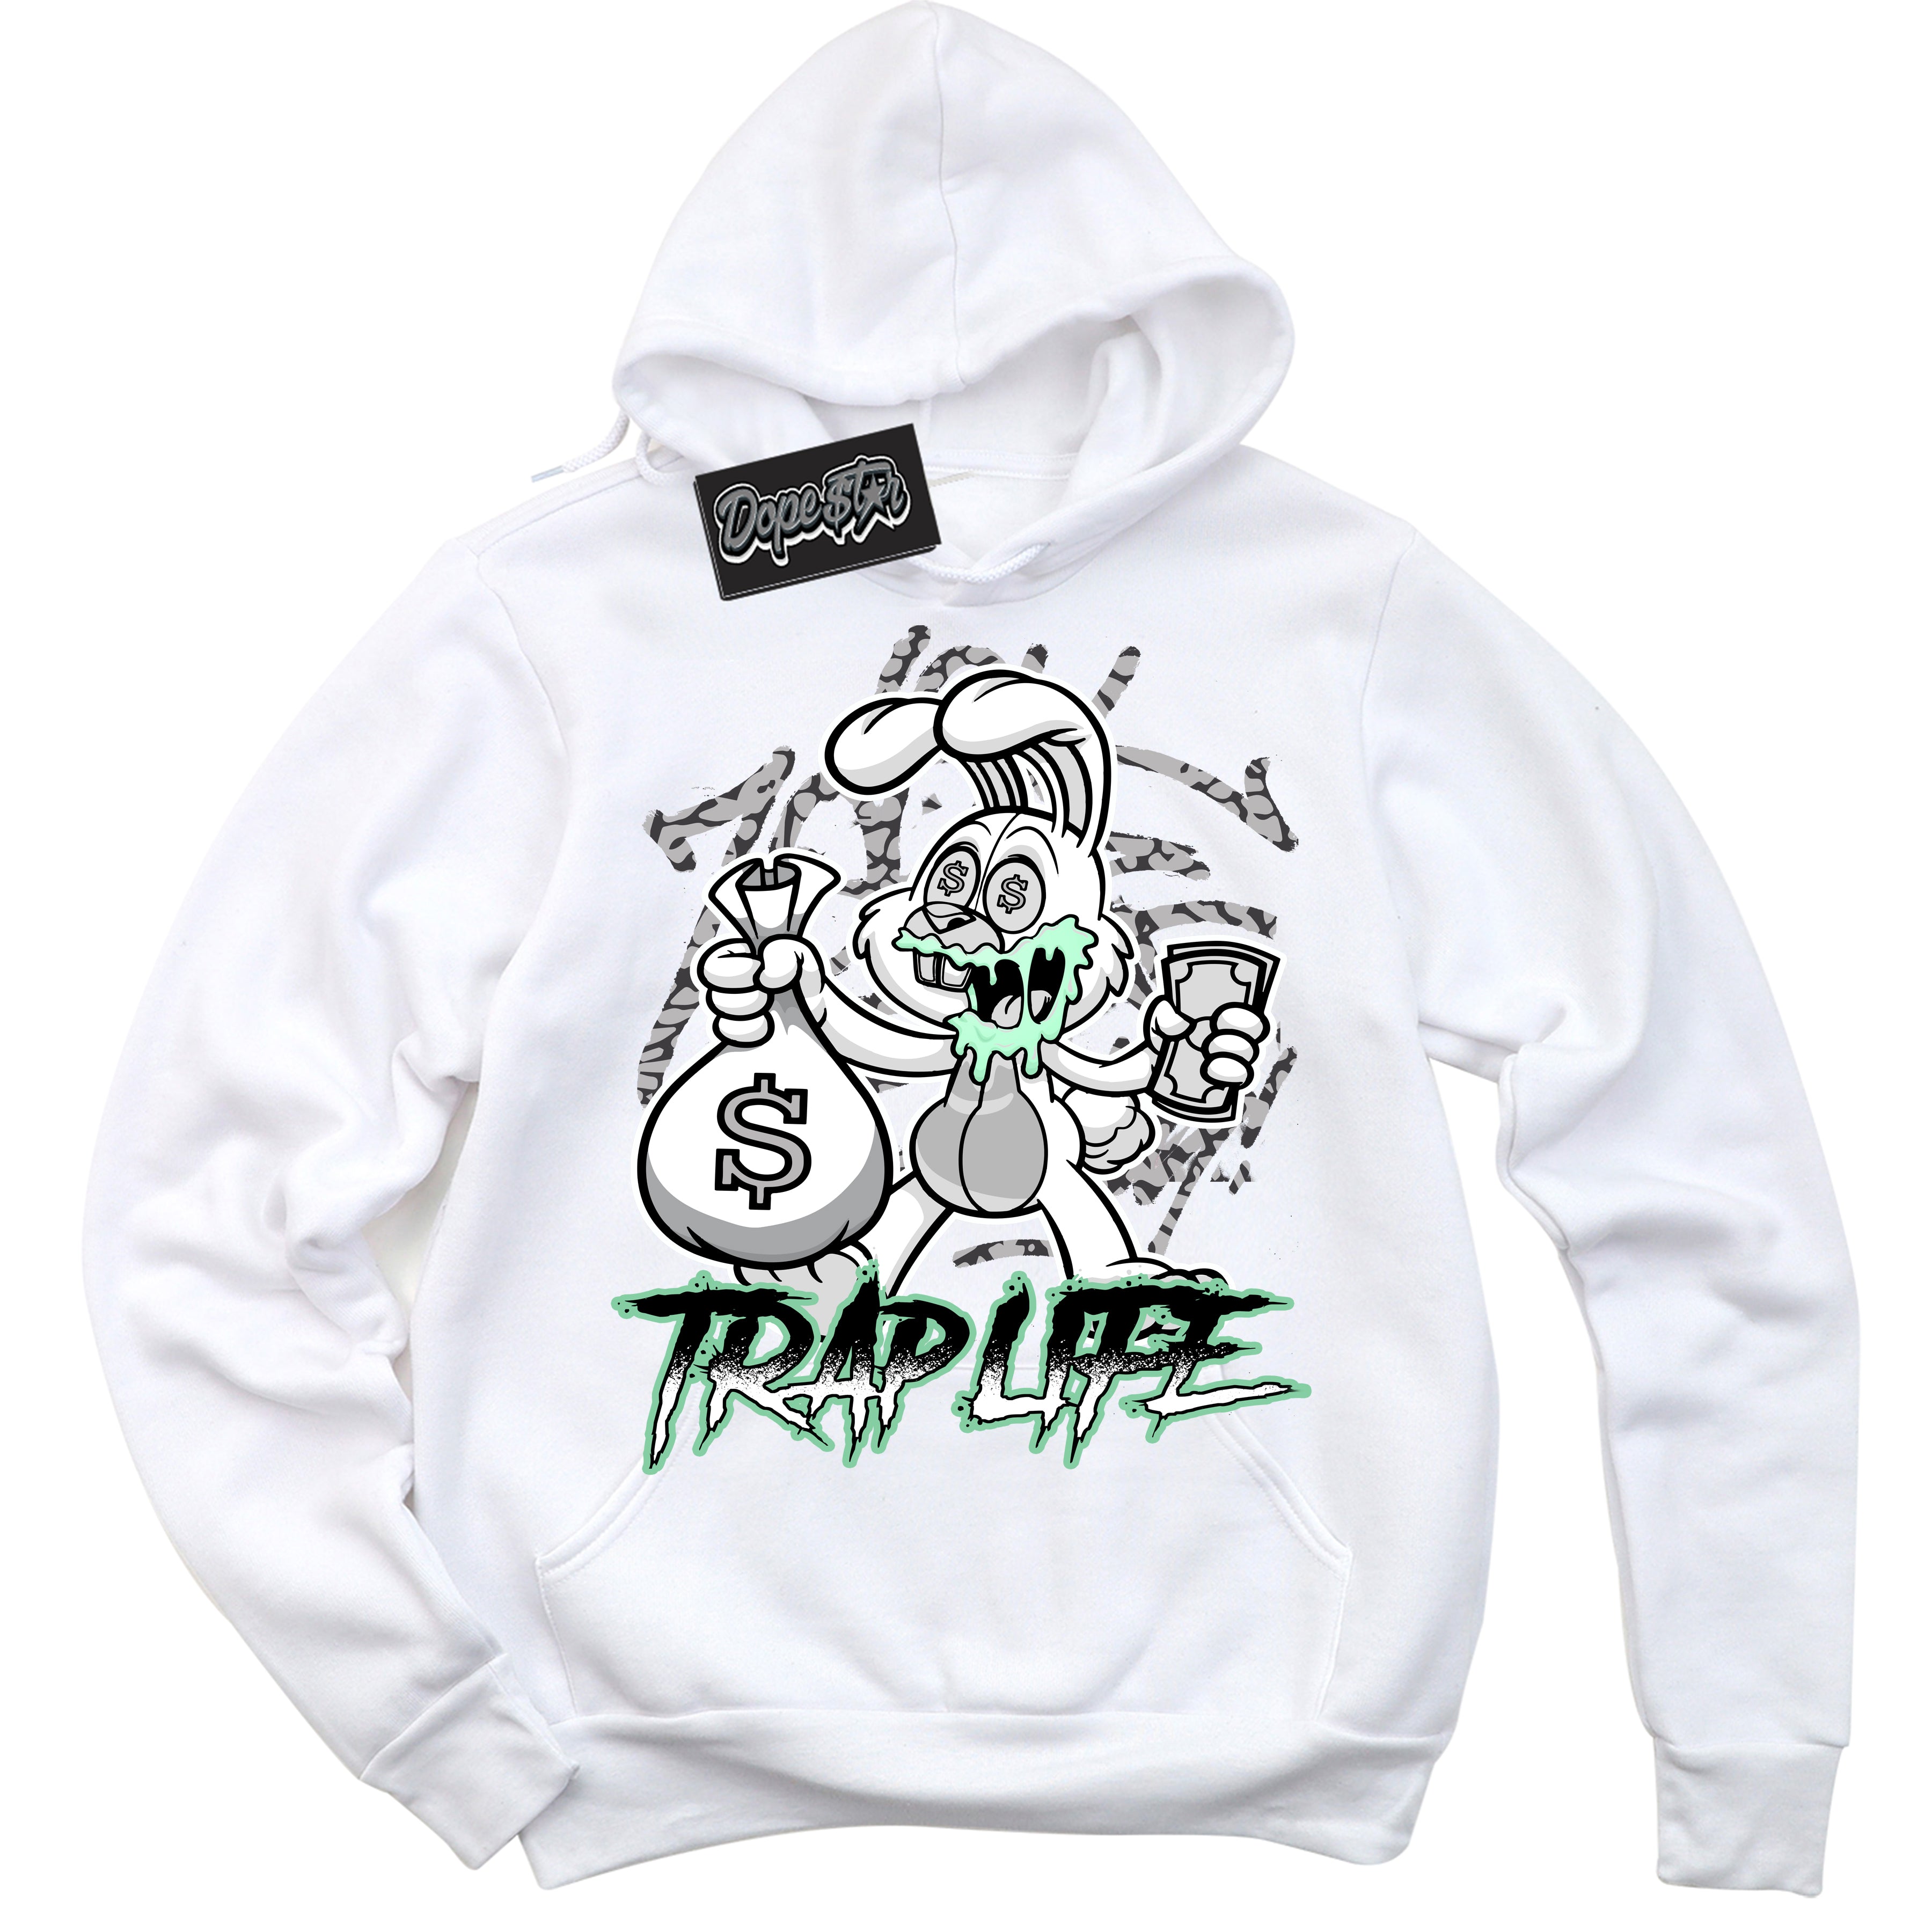 Cool White Graphic DopeStar Hoodie with “ Trap Rabbit “ print, that perfectly matches Green Glow 3s sneakers